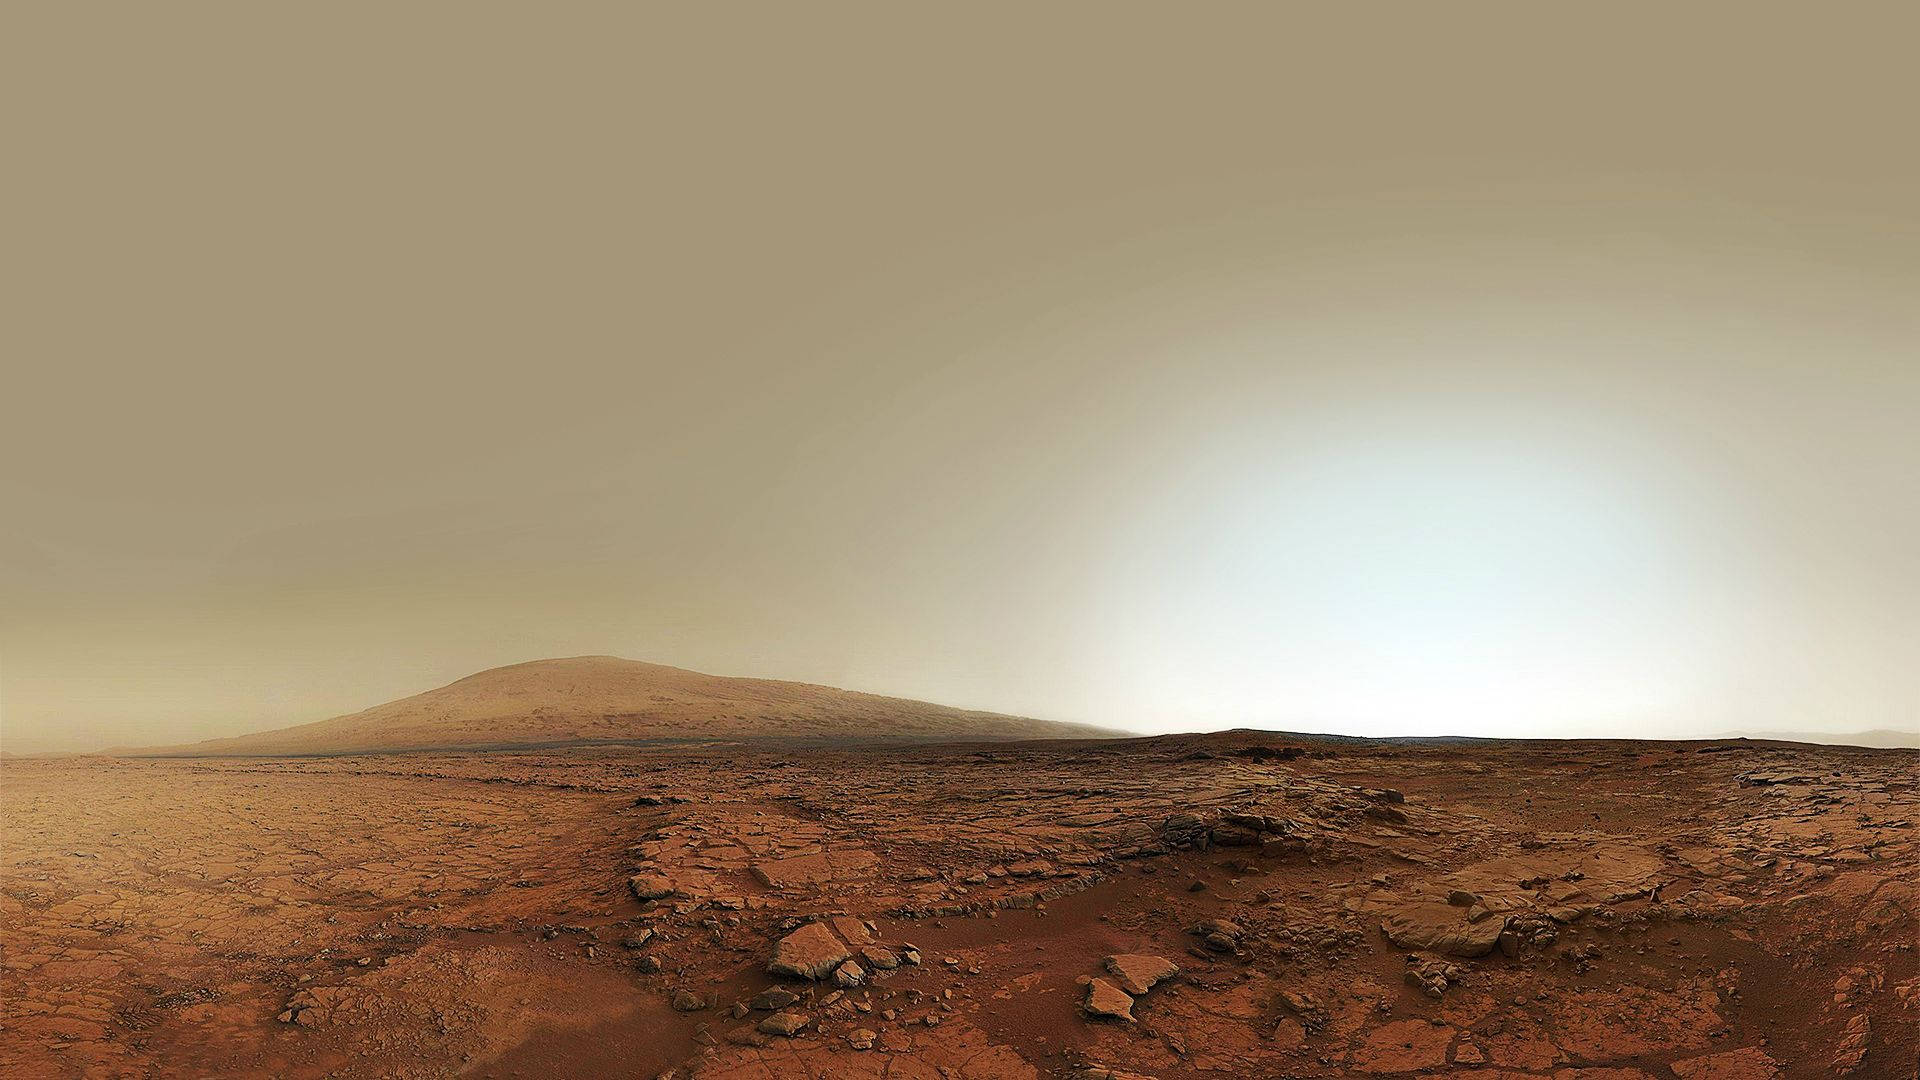 Mars 1920X1080 Wallpaper and Background Image